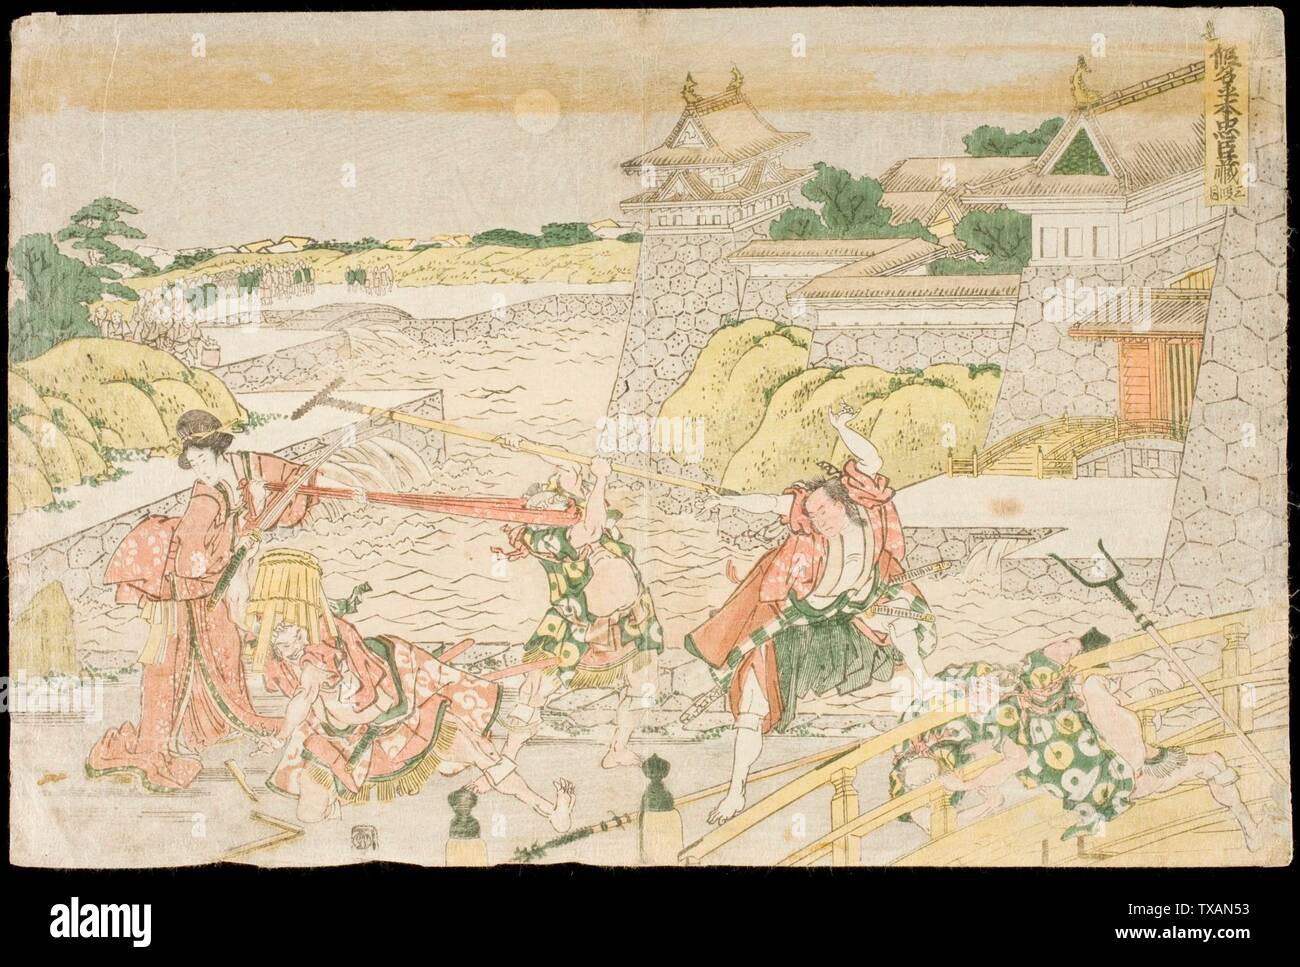 ÅŒkaru and Kampei outside Kamakura Castle, Act III from the Play ChÅ«shingura;  1806 Prints; woodcuts Color woodbk print Sheet:  9 7/8 x 14 3/4 in. (25.08 x 37.47 cm) The Joan Elizabeth Tanney Bequest (M.2006.136.128) Japanese Art; 1806date QS:P571,+1806-00-00T00:00:00Z/9; Stock Photo